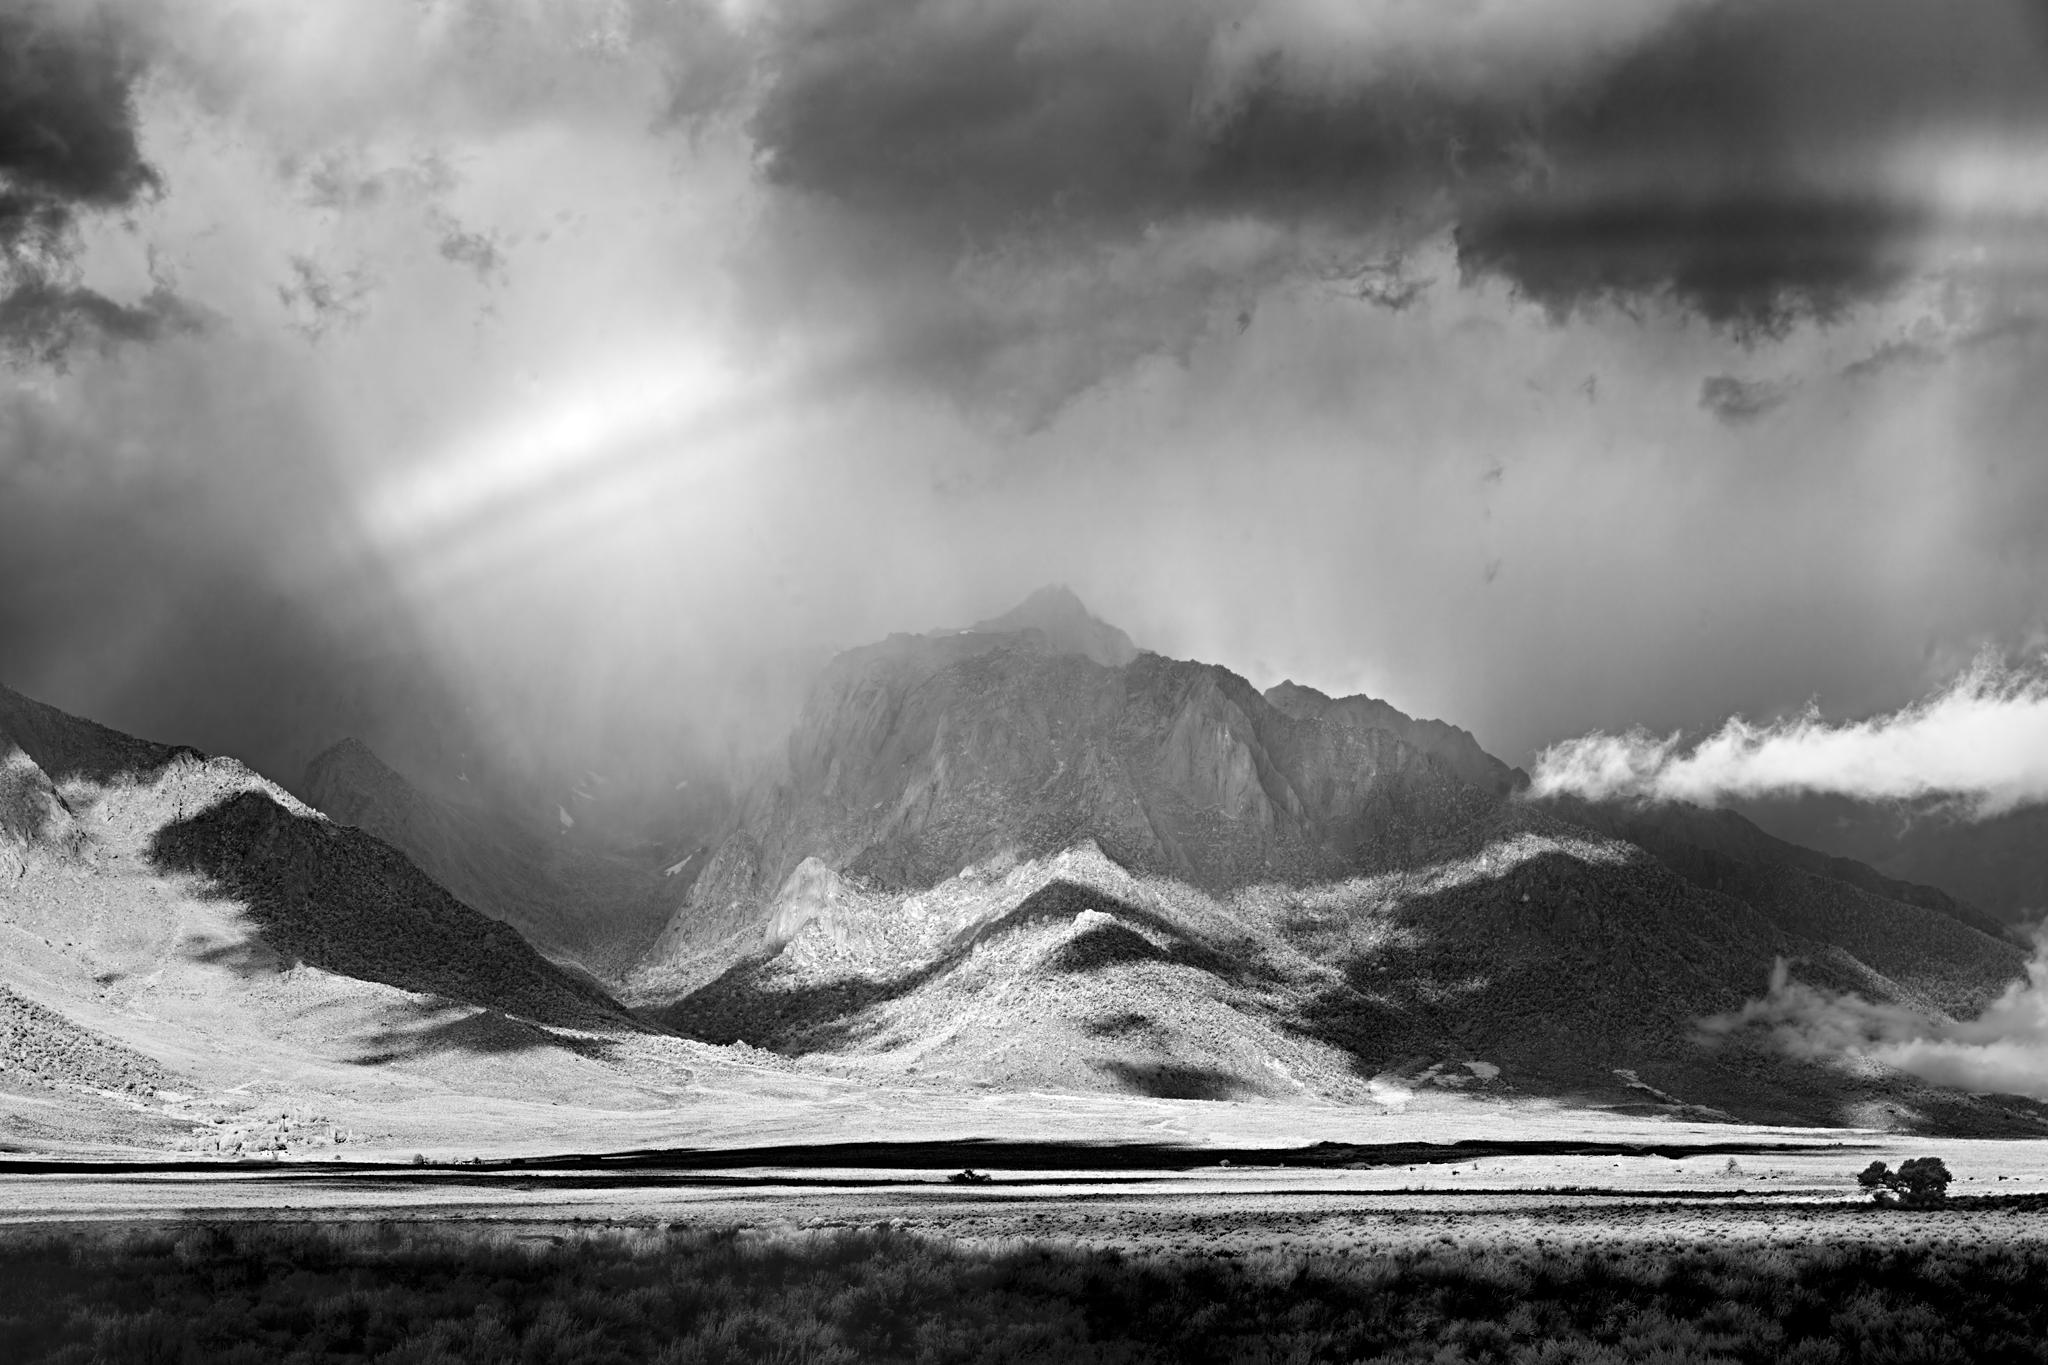 Mitch Dobrowner Black and White Photograph - Lone Pine Peak, Eastern Sierra Nevada, CA, limited edition photograph, signed 